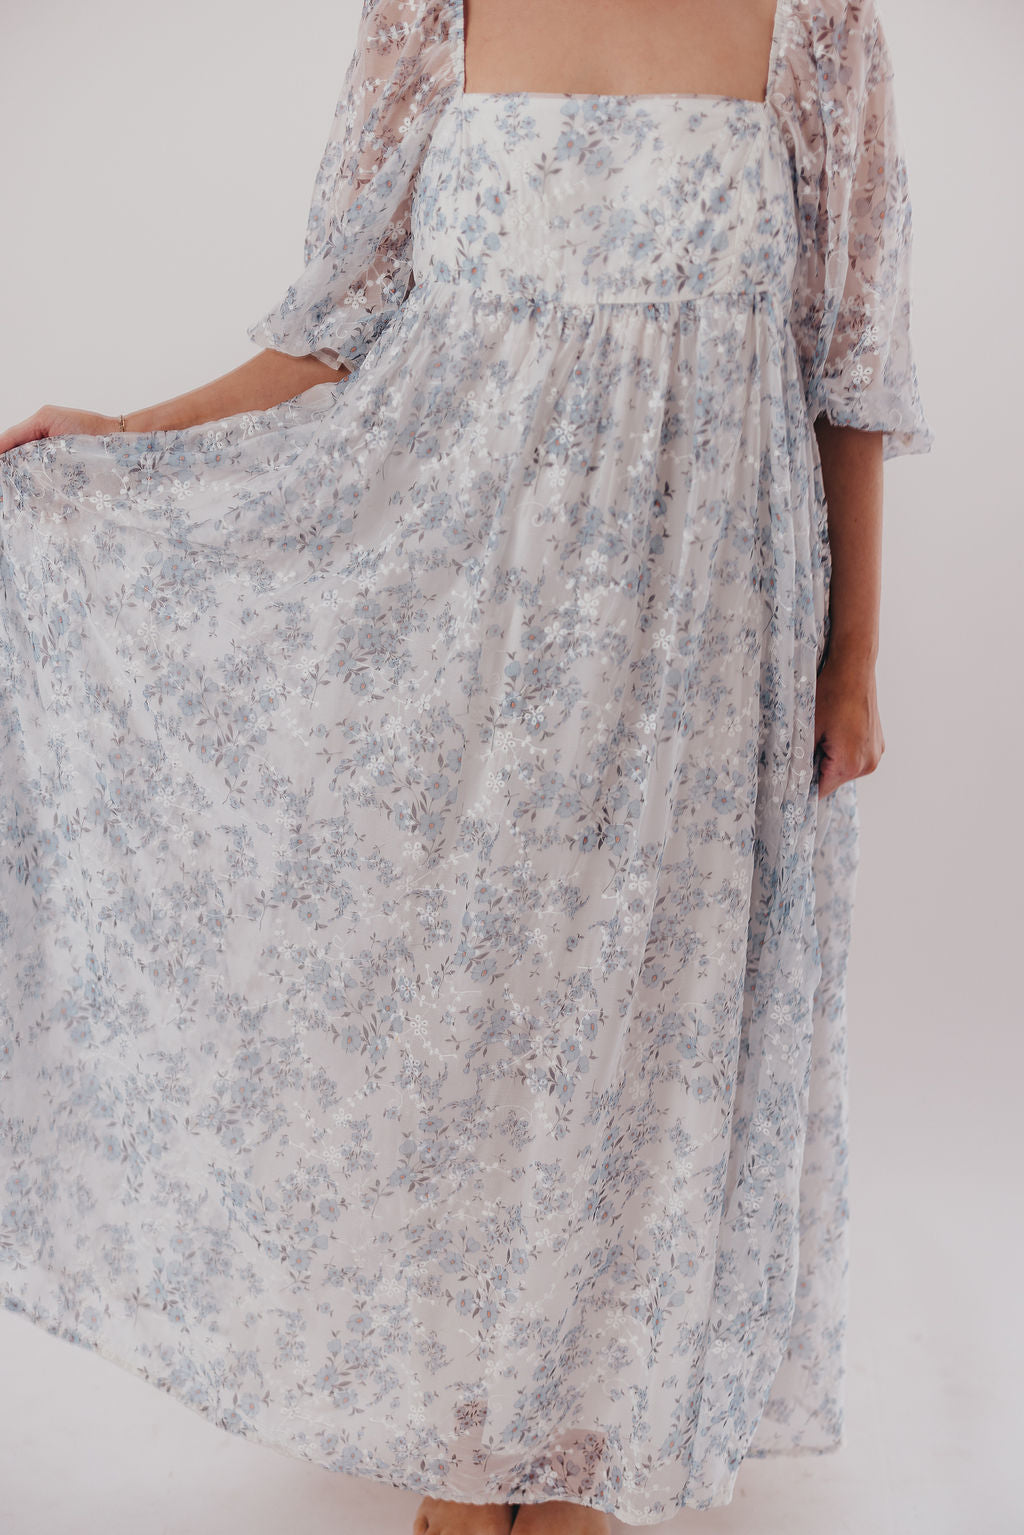 Mona Maxi Dress with Smocking in Blue White - Bump Friendly & Inclusive Sizing (S-3XL)